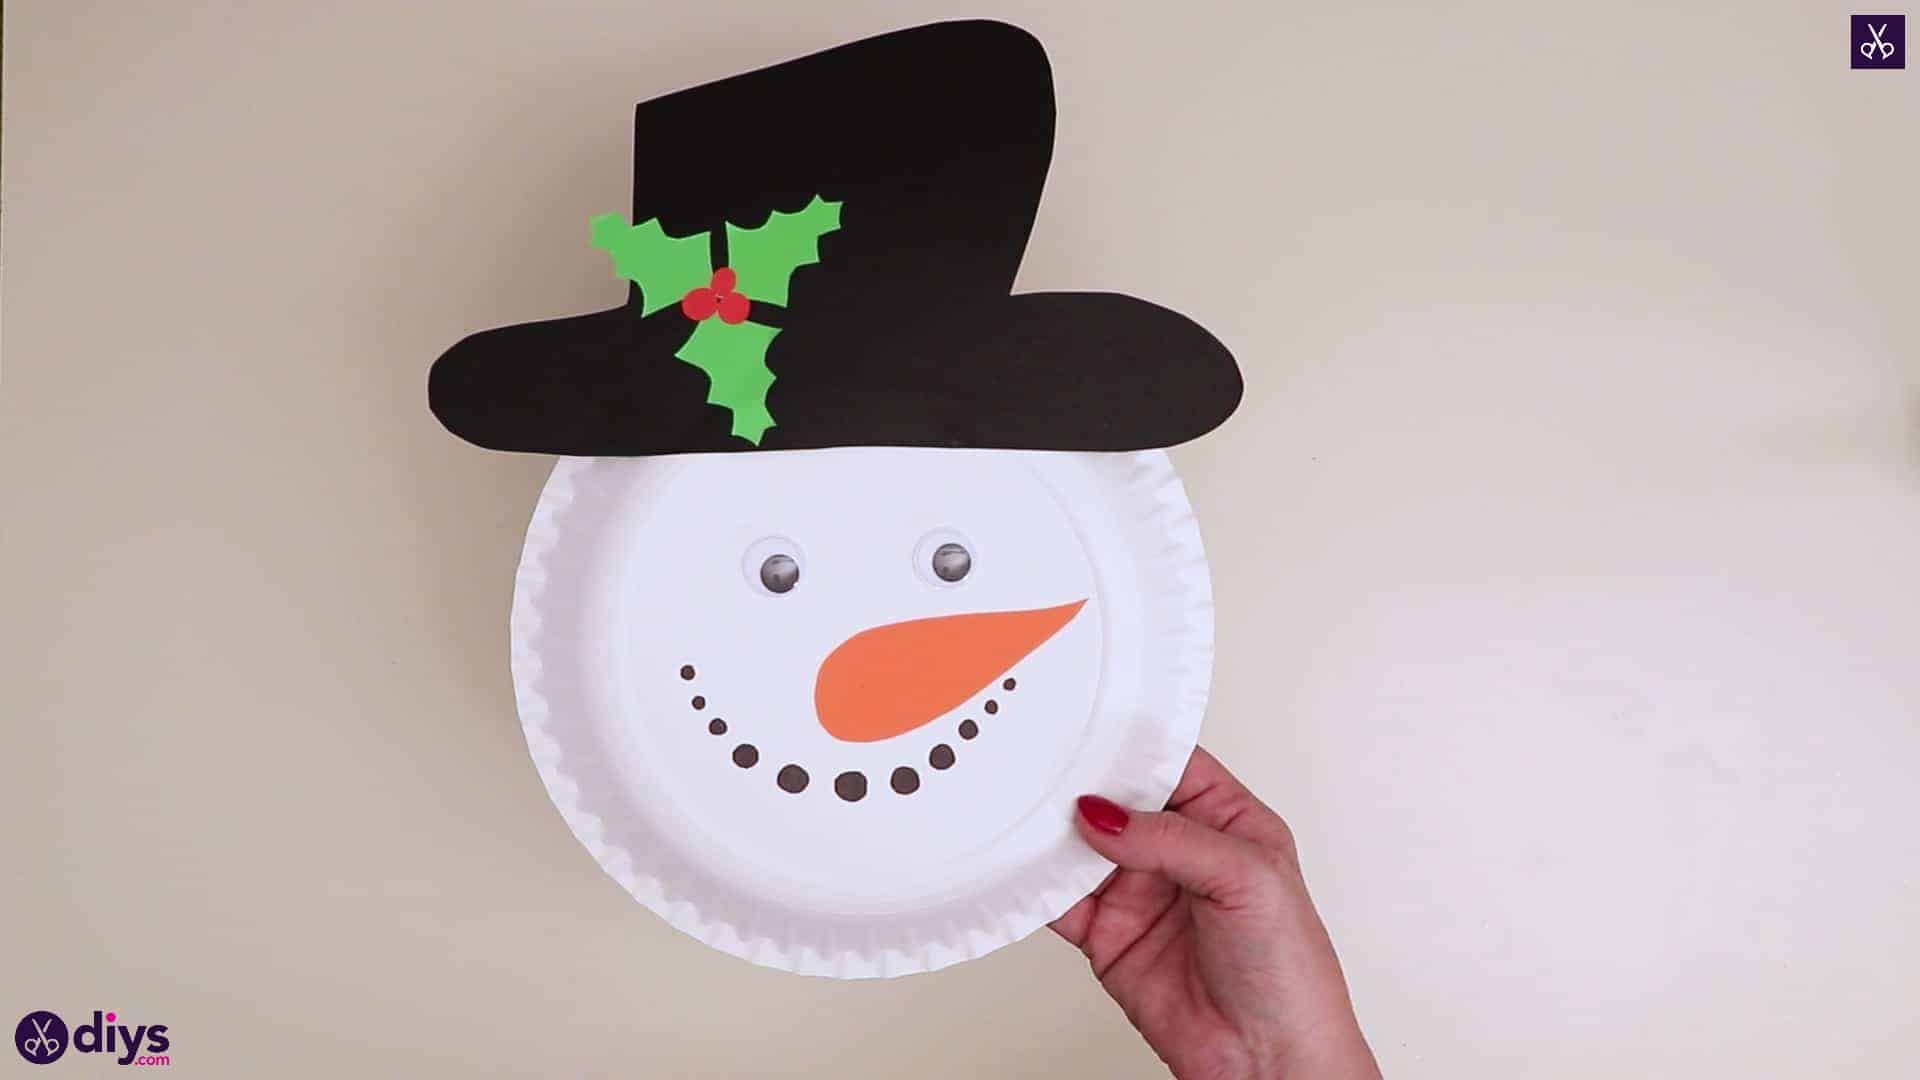 Easy To Make Snowman Head Craft Using Paper Plate, Colorful Paper, Googly Eyes & Marker - A simple winter craft for children - constructing a snowman from a paper plate. 